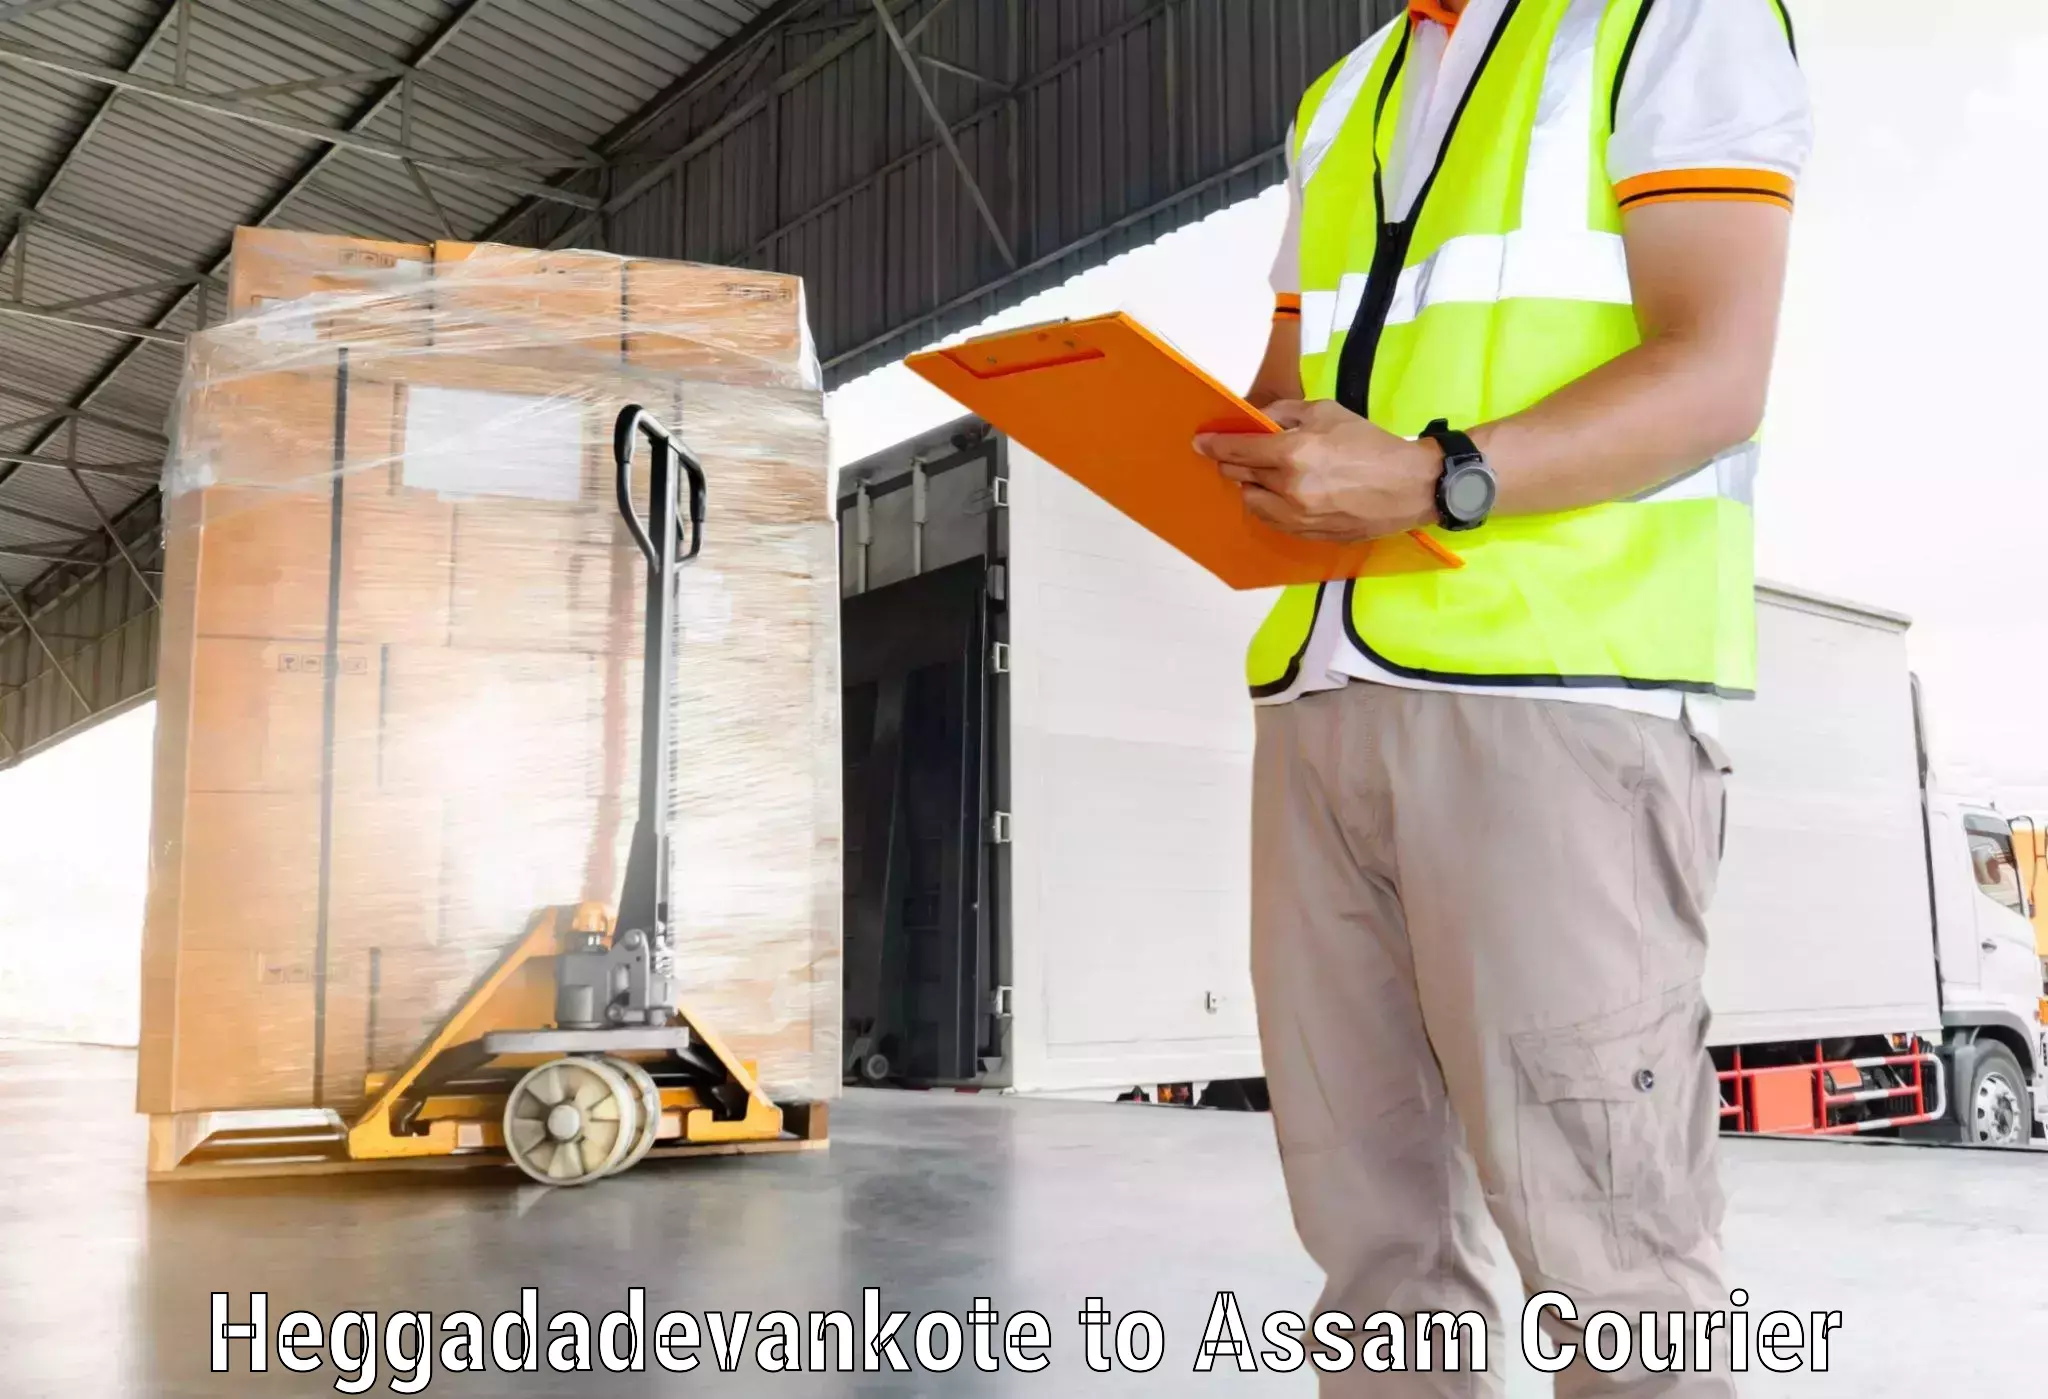 Sustainable delivery practices Heggadadevankote to Assam